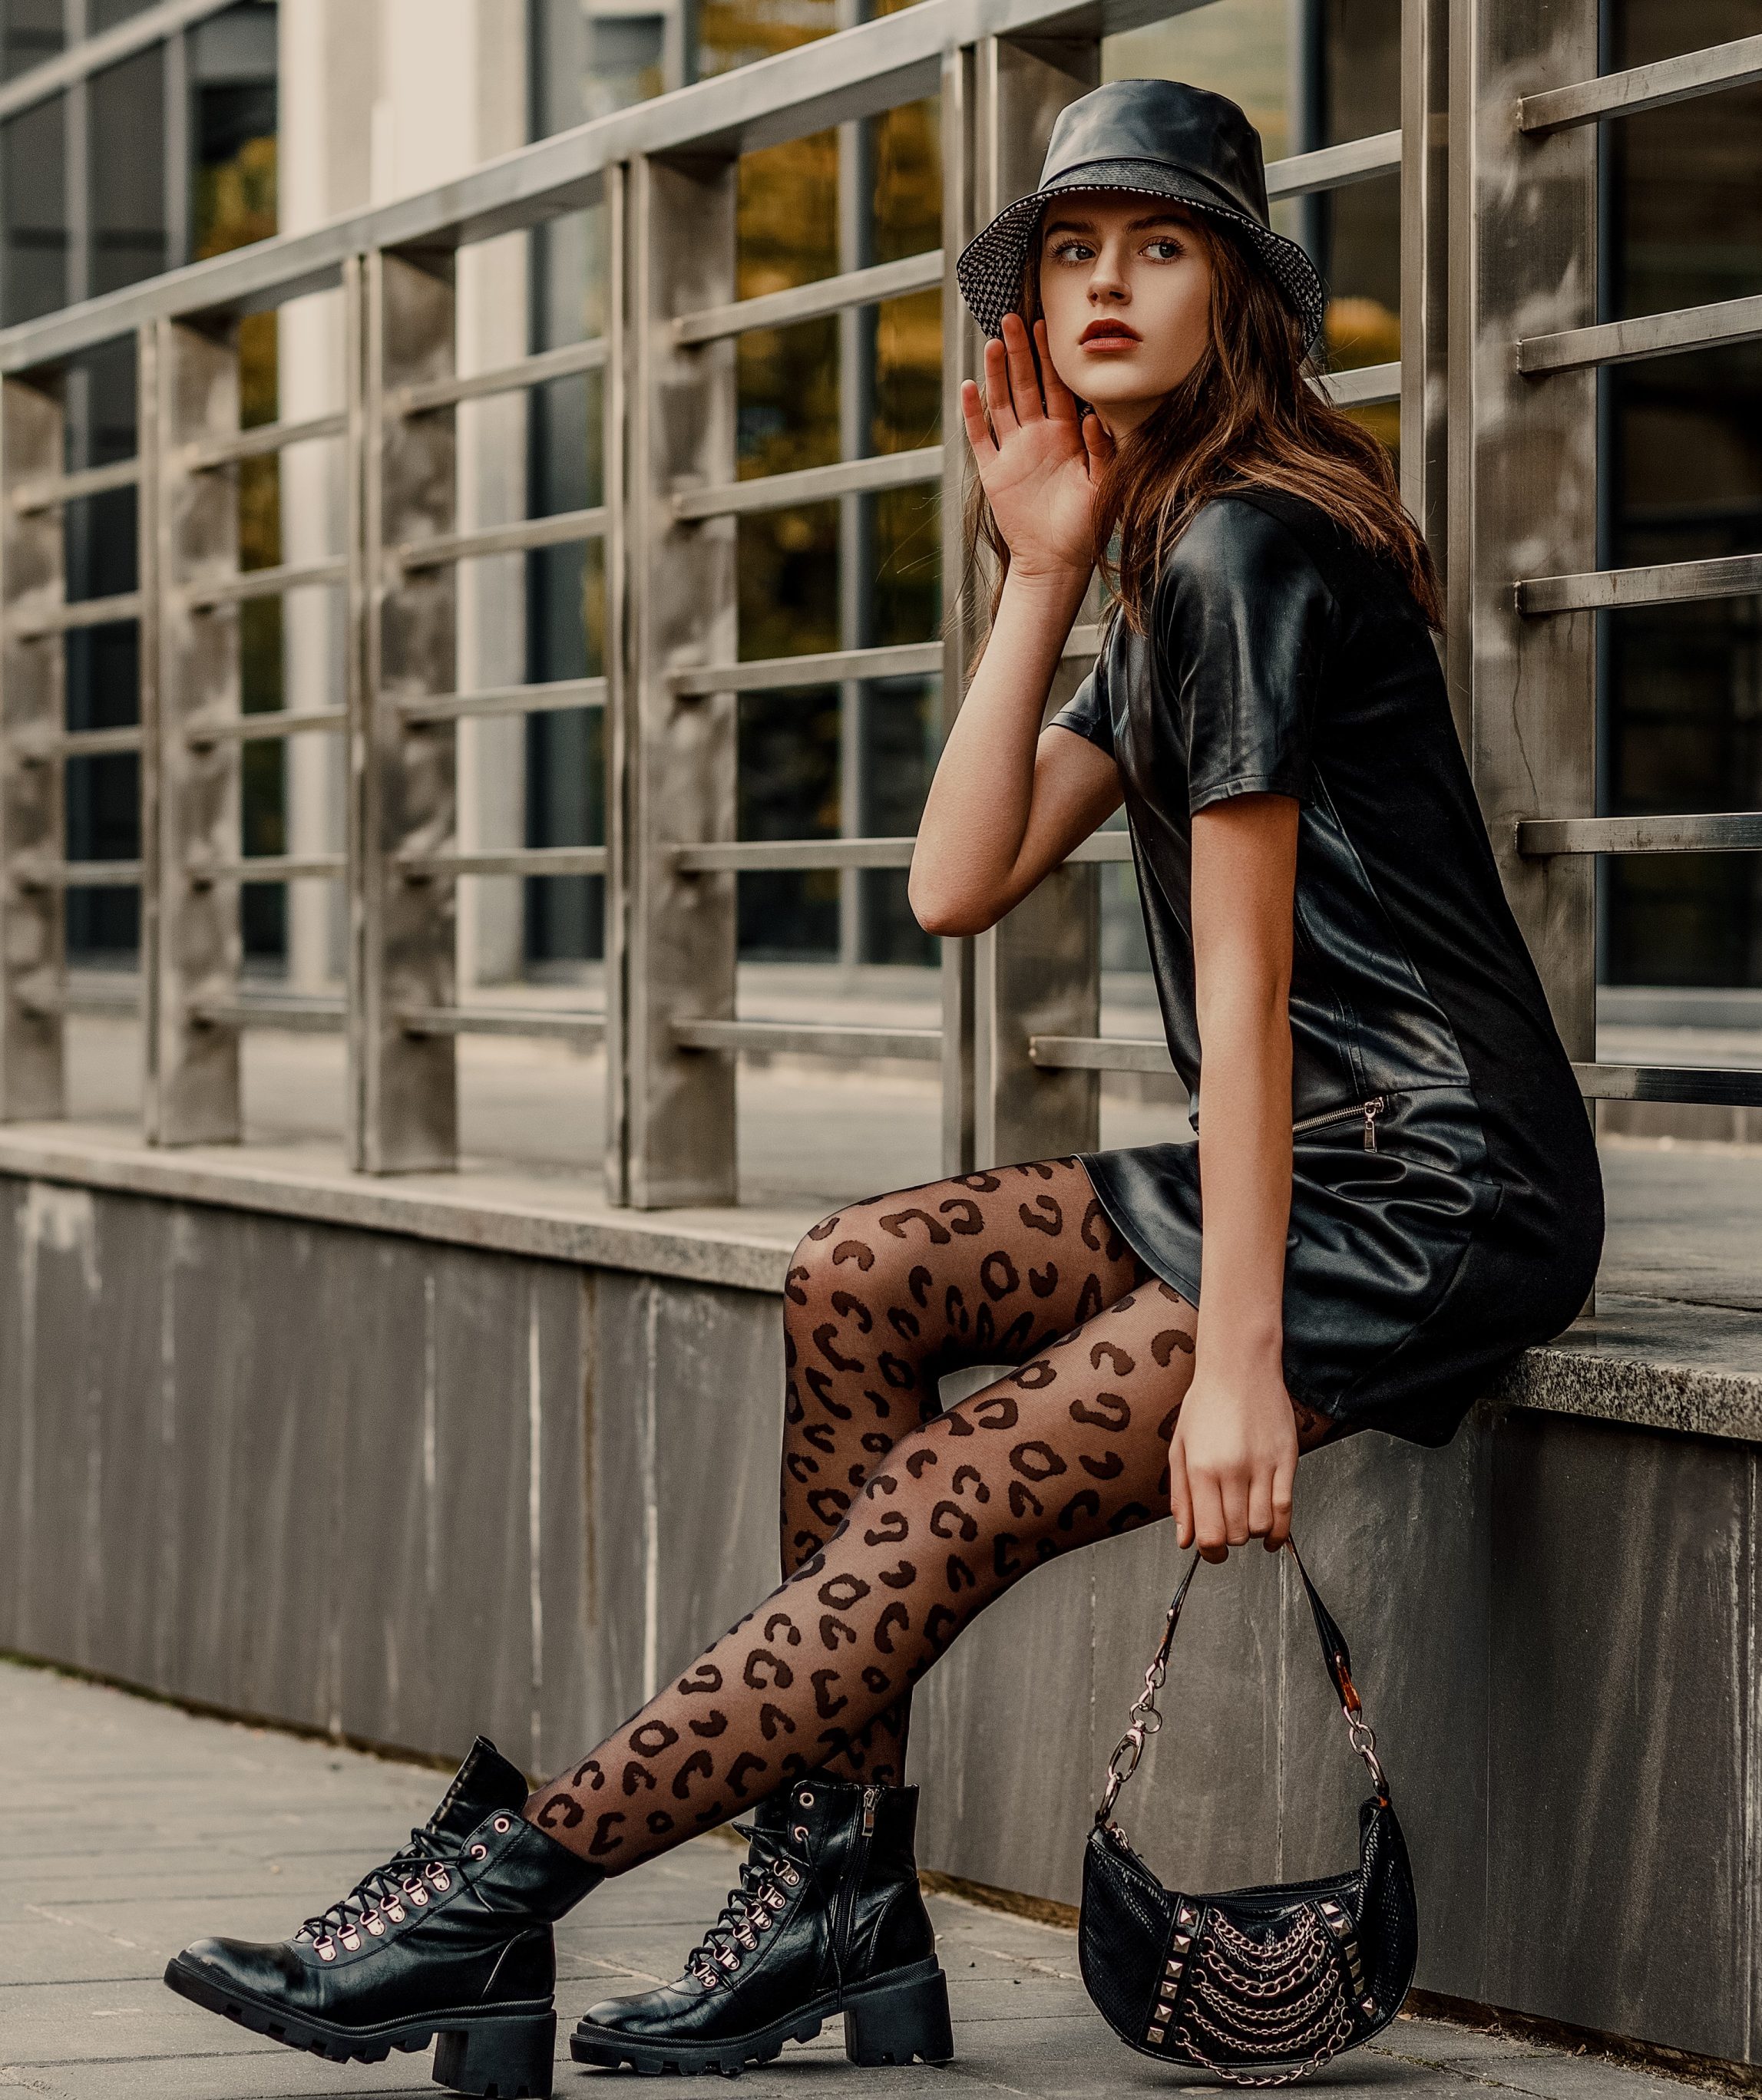 Trendy Leather Bucket hat, Dress, Black Leopard Print Tights, Ankle Boots And Small Bag